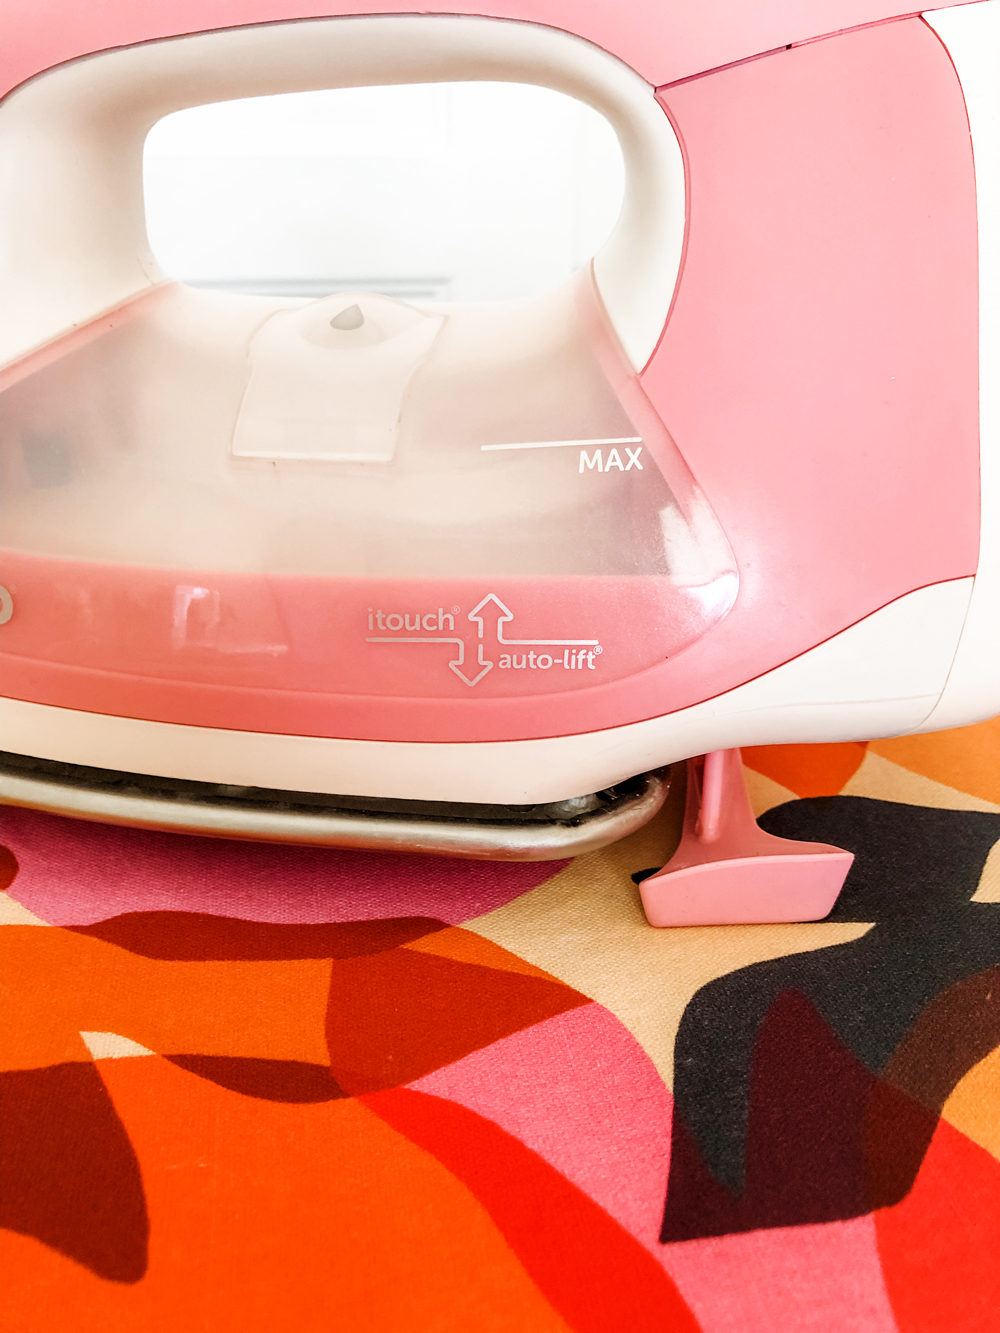 An honest review of the Oliso Iron. It's called a smart iron, but what makes it different than other irons? Is it the best iron for you? suzyquilts.com #sewing